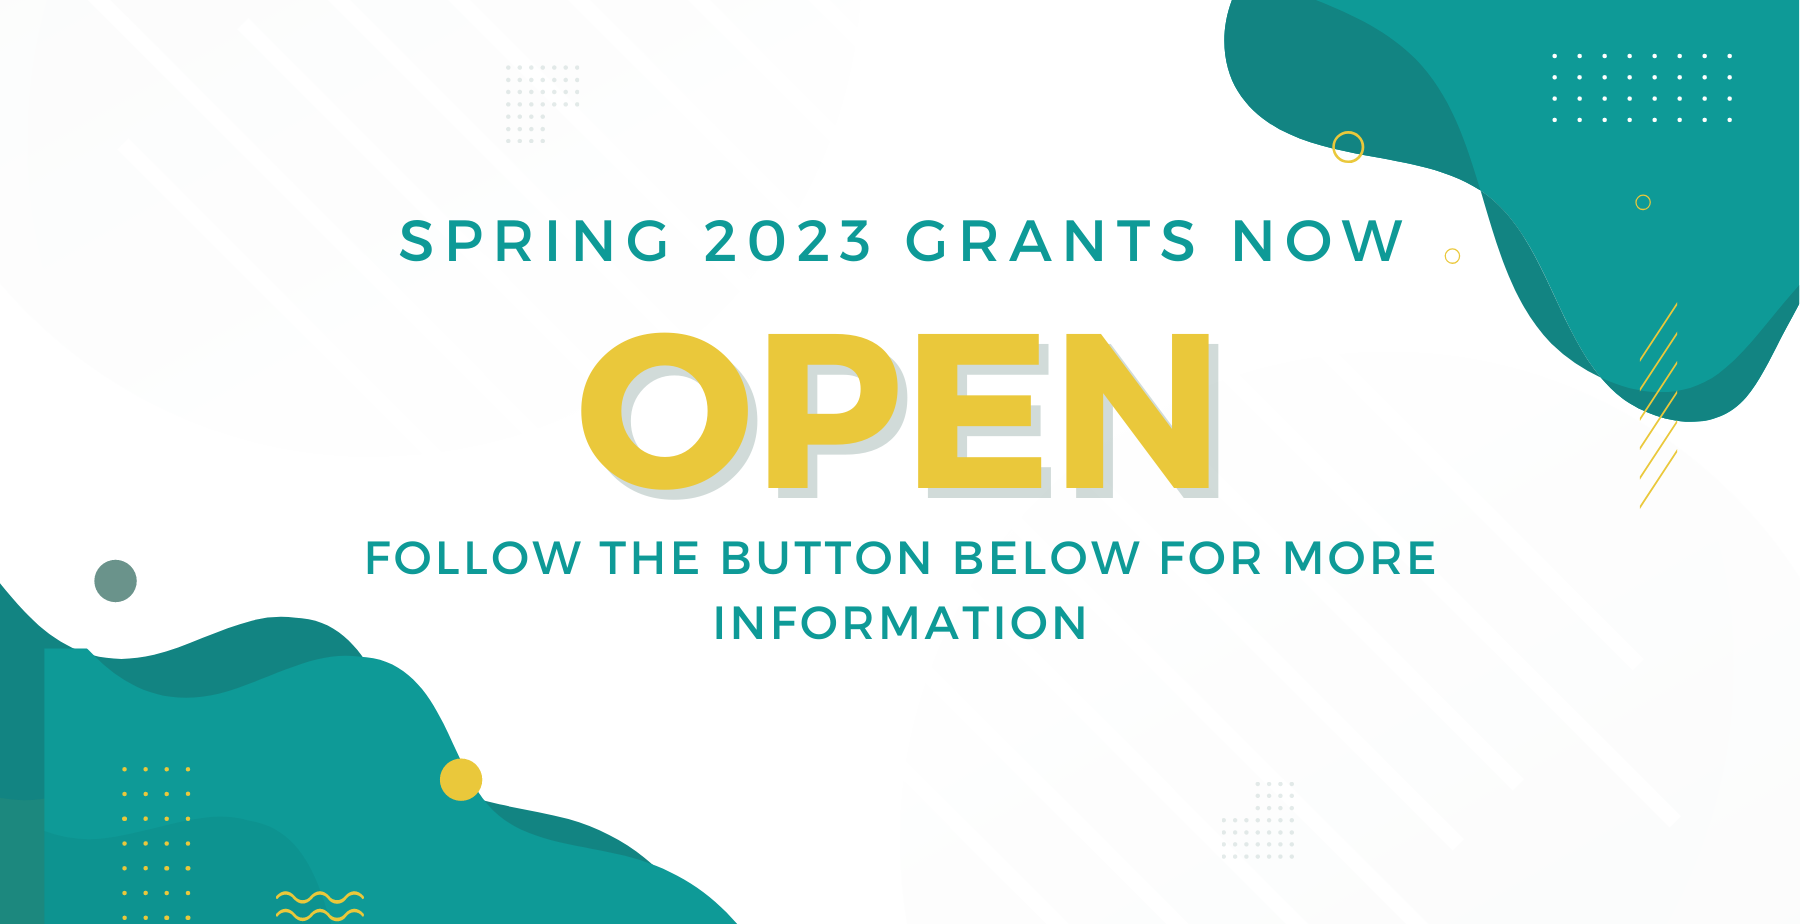 Spring 2023 Grant Applications are Open